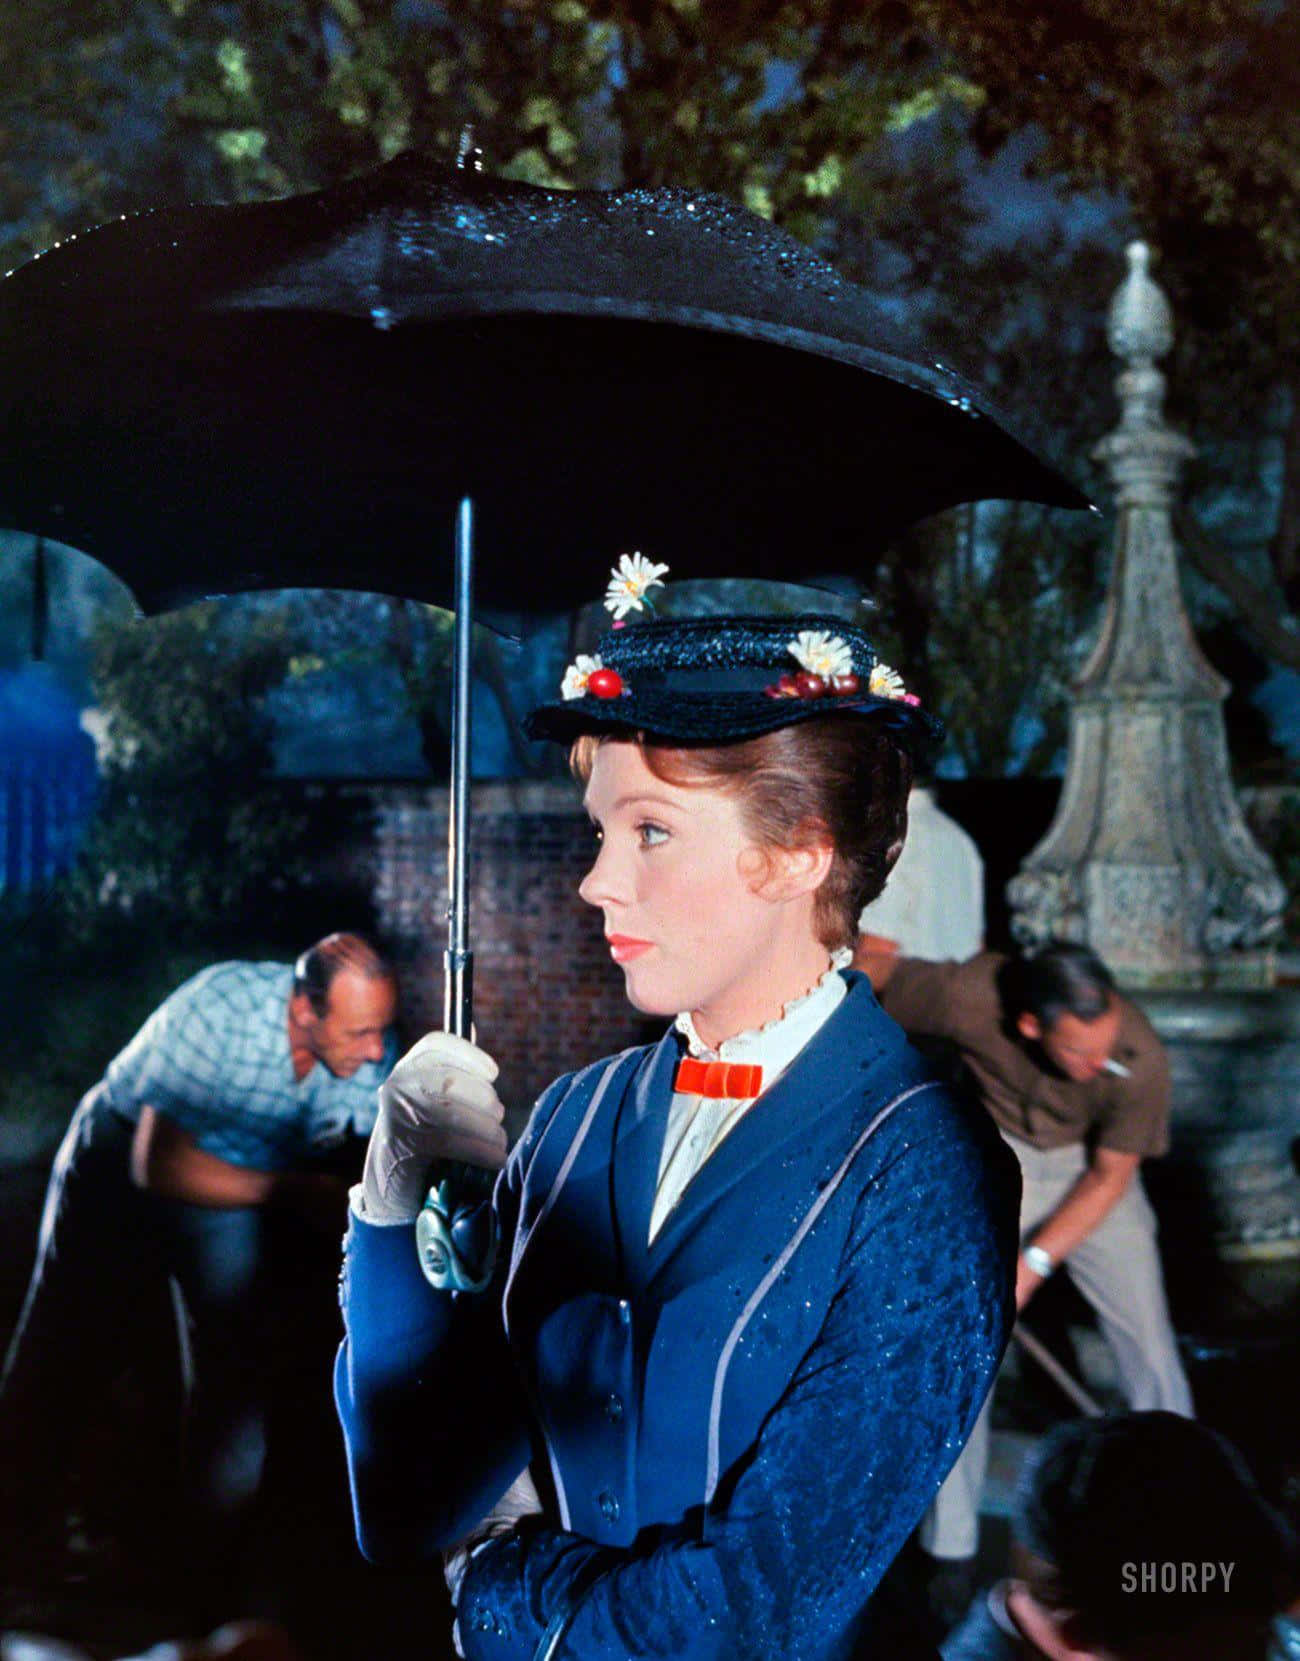 Mary Poppins soaring through the sky with her umbrella Wallpaper